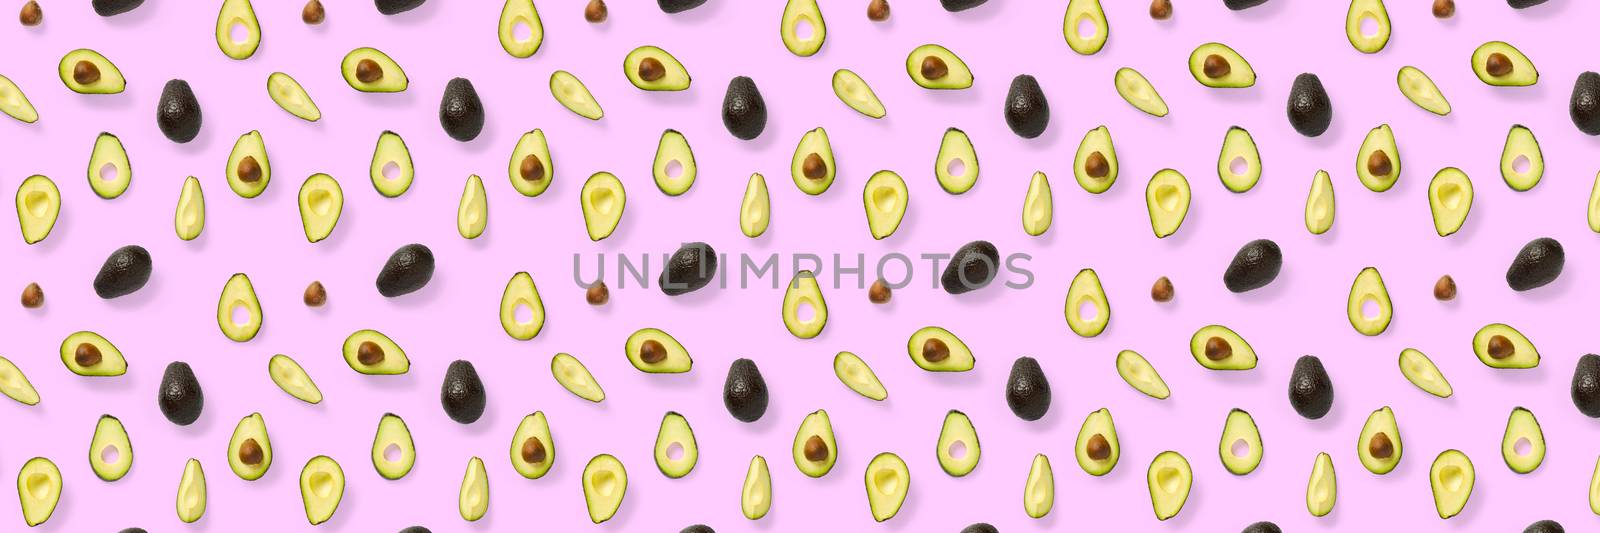 Avocado banner. Background made from isolated Avocado pieces on pink background. Flat lay of fresh ripe avocados and avacado pieces